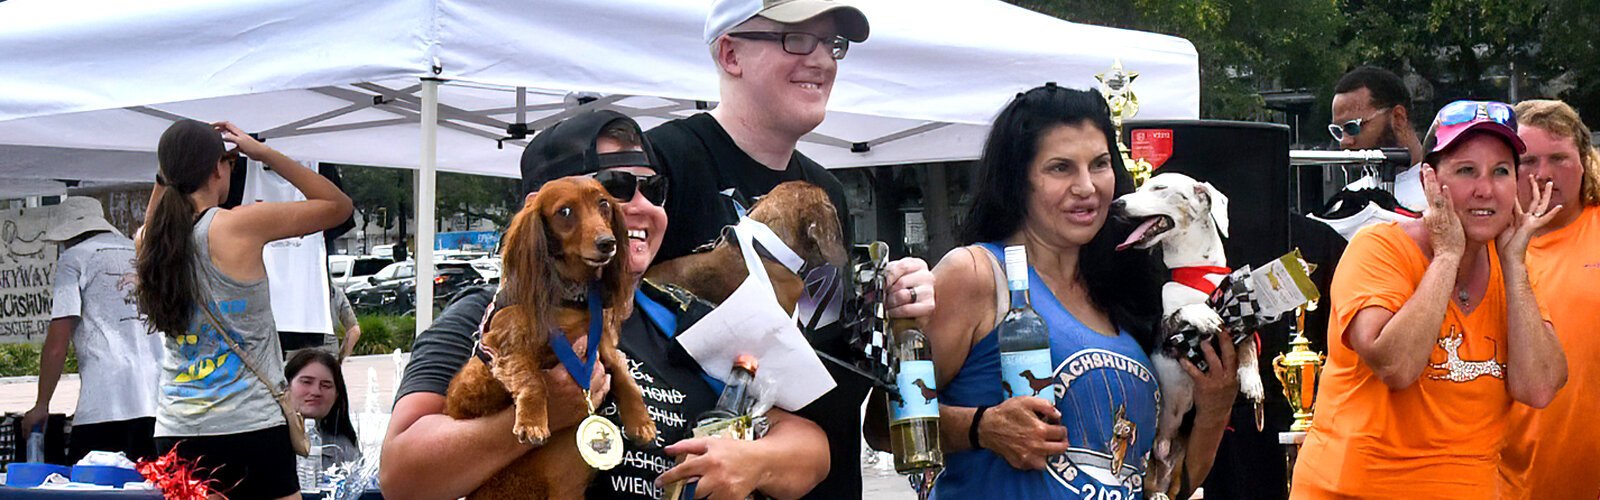 Winners of the Florida Wiener Dog Derby pose for a picture with their humans, displaying medals and prizes won at the running races.